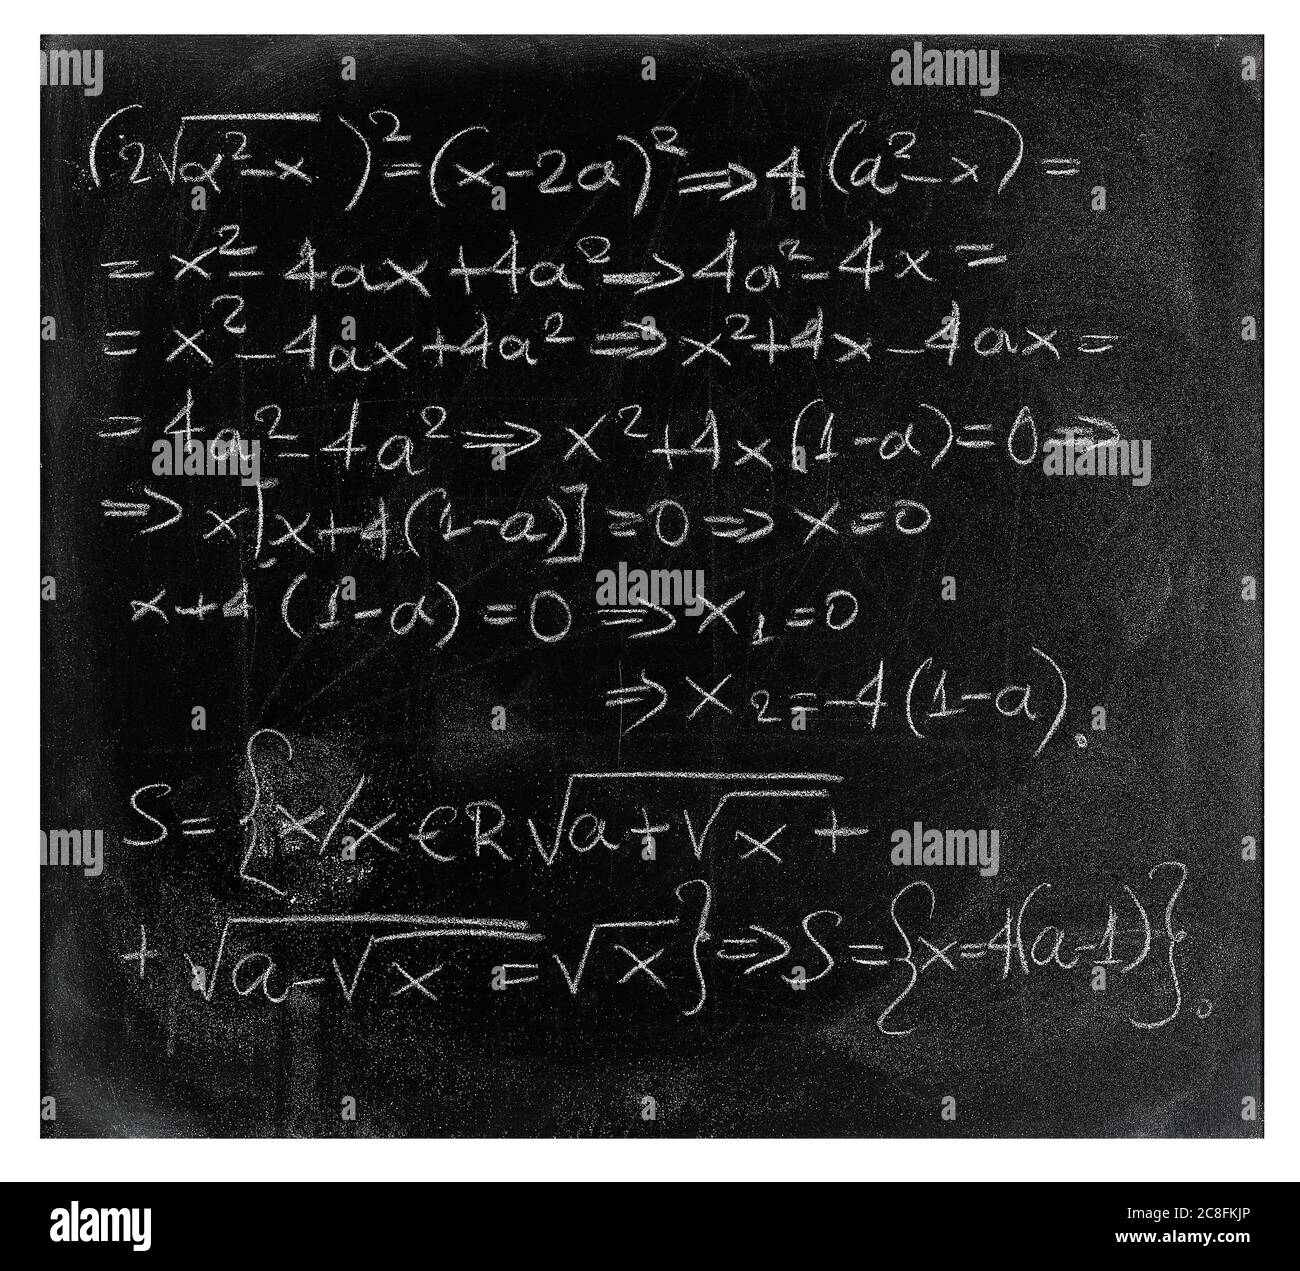 equation written with chalk on black chalkboard Stock Photo